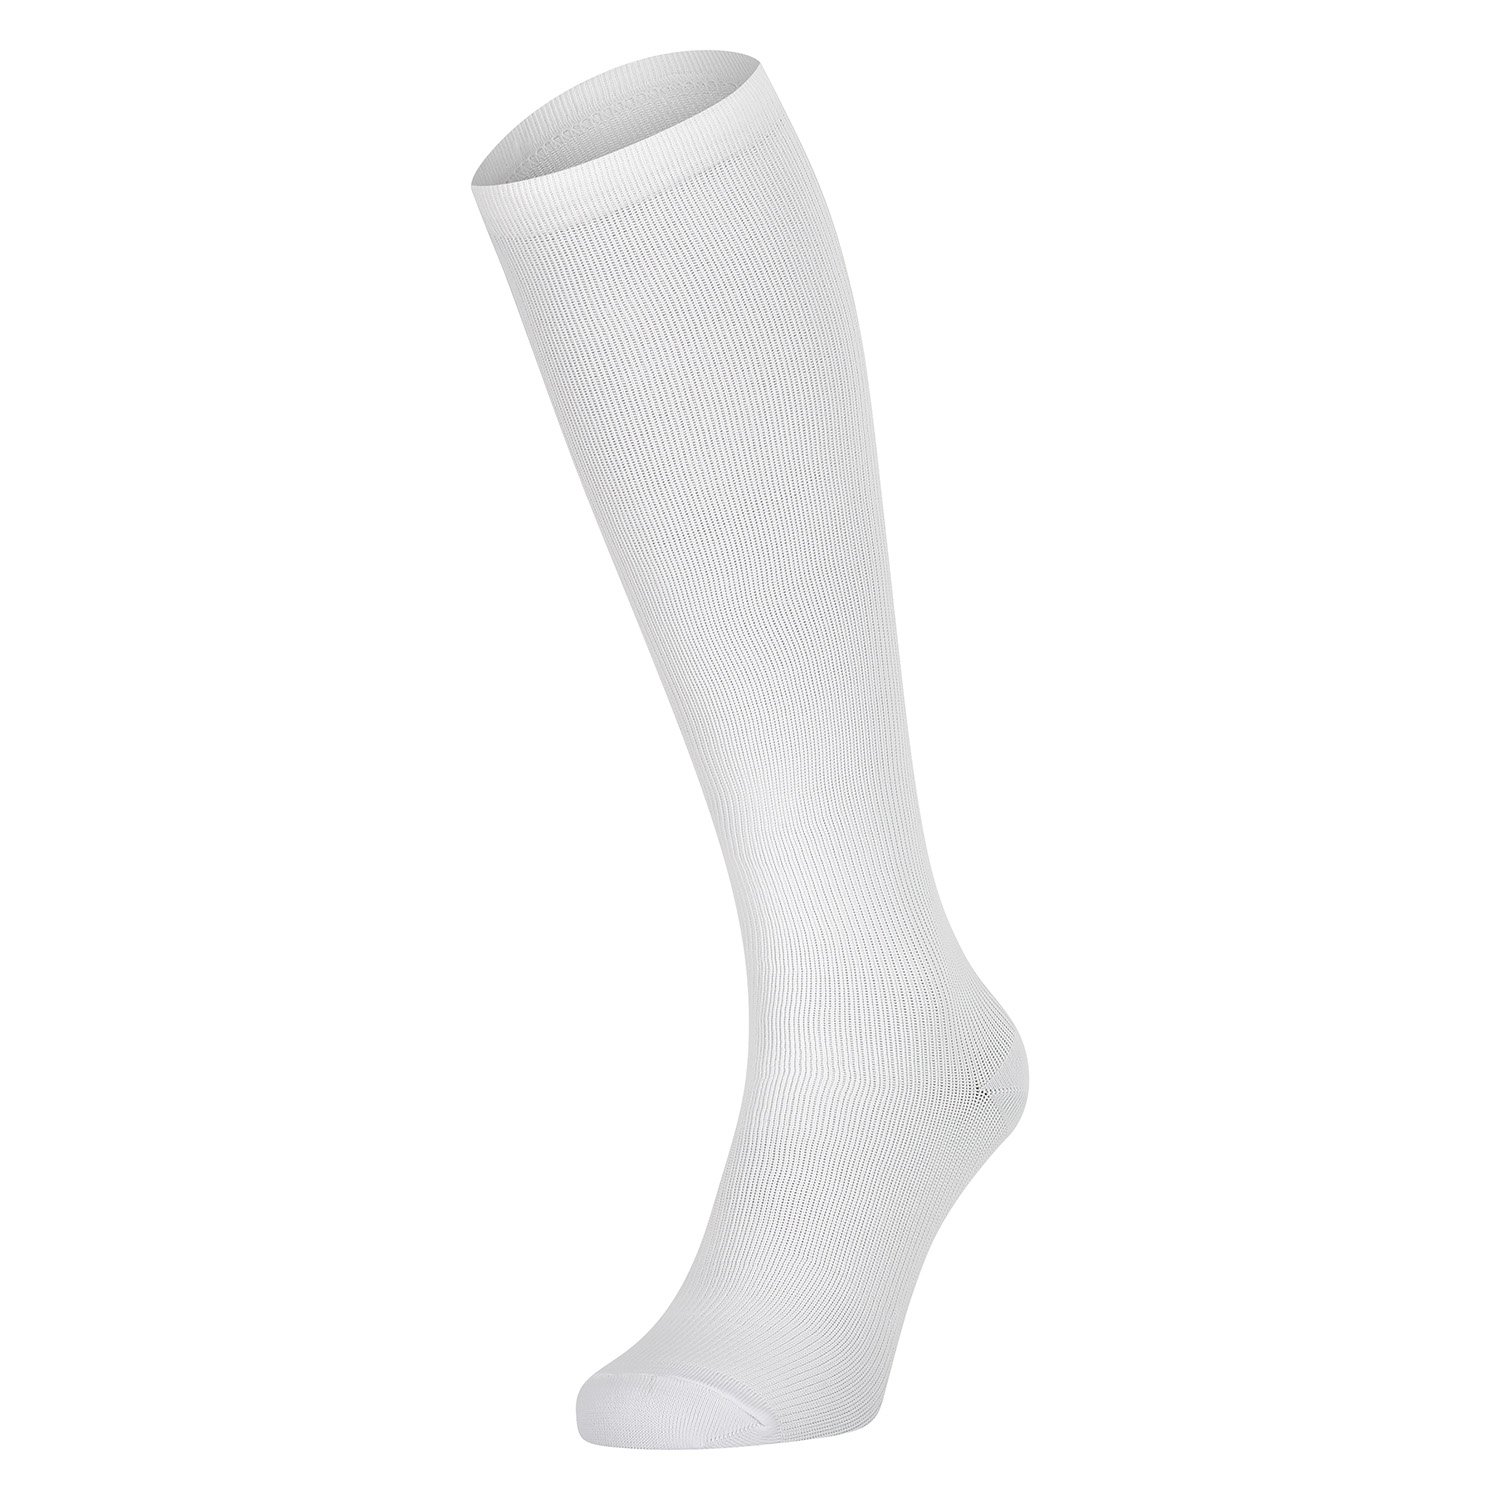 Support Stockings / Travel Stockings - Closed Toe white